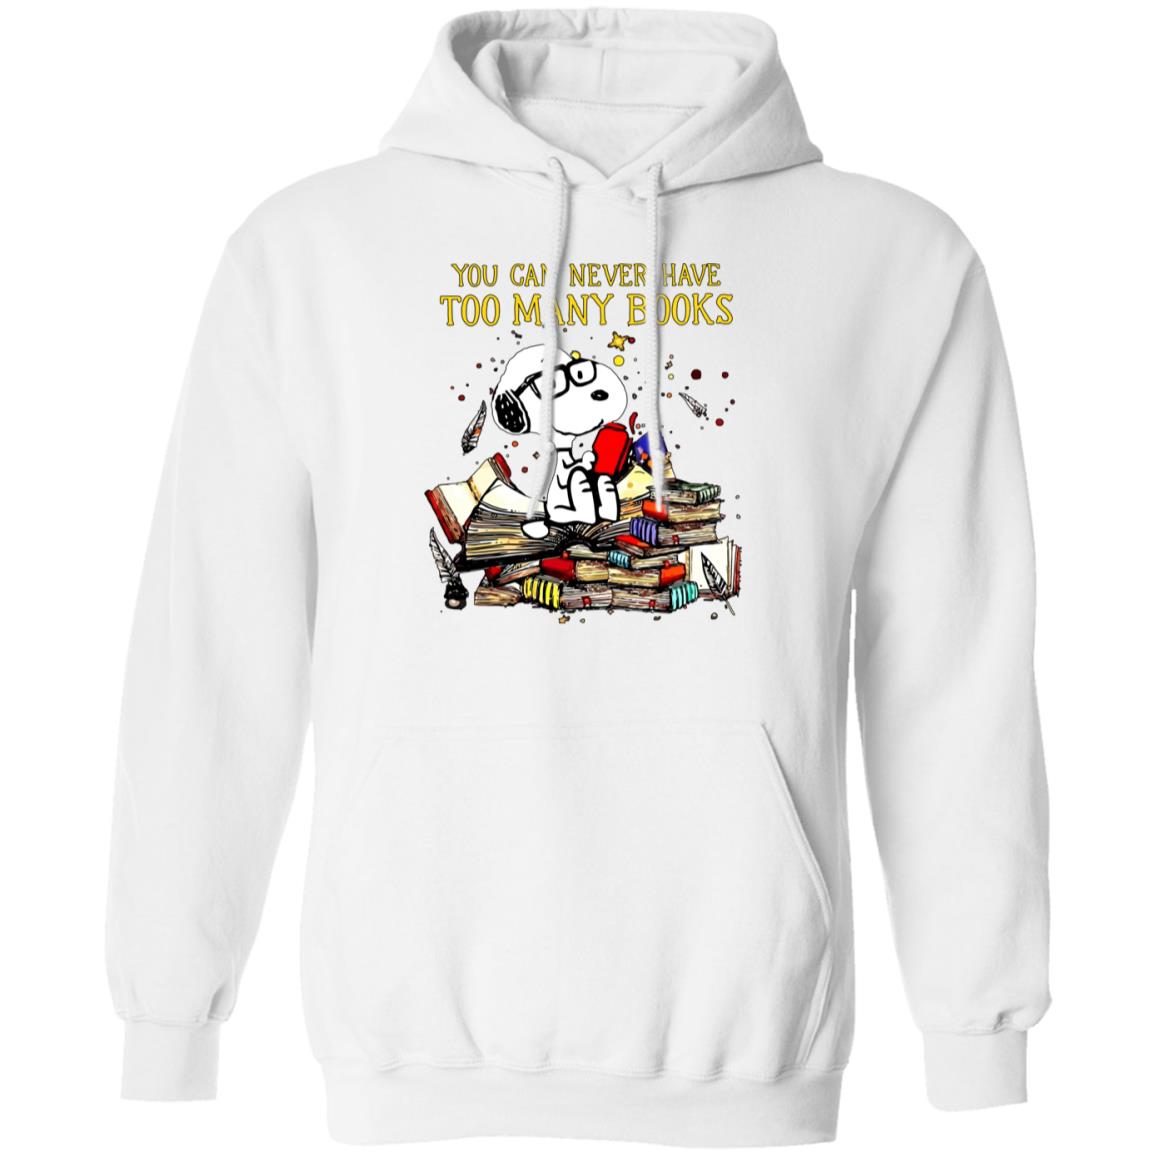 Snoopy You Can Never Have Too Many Books Shirt 1